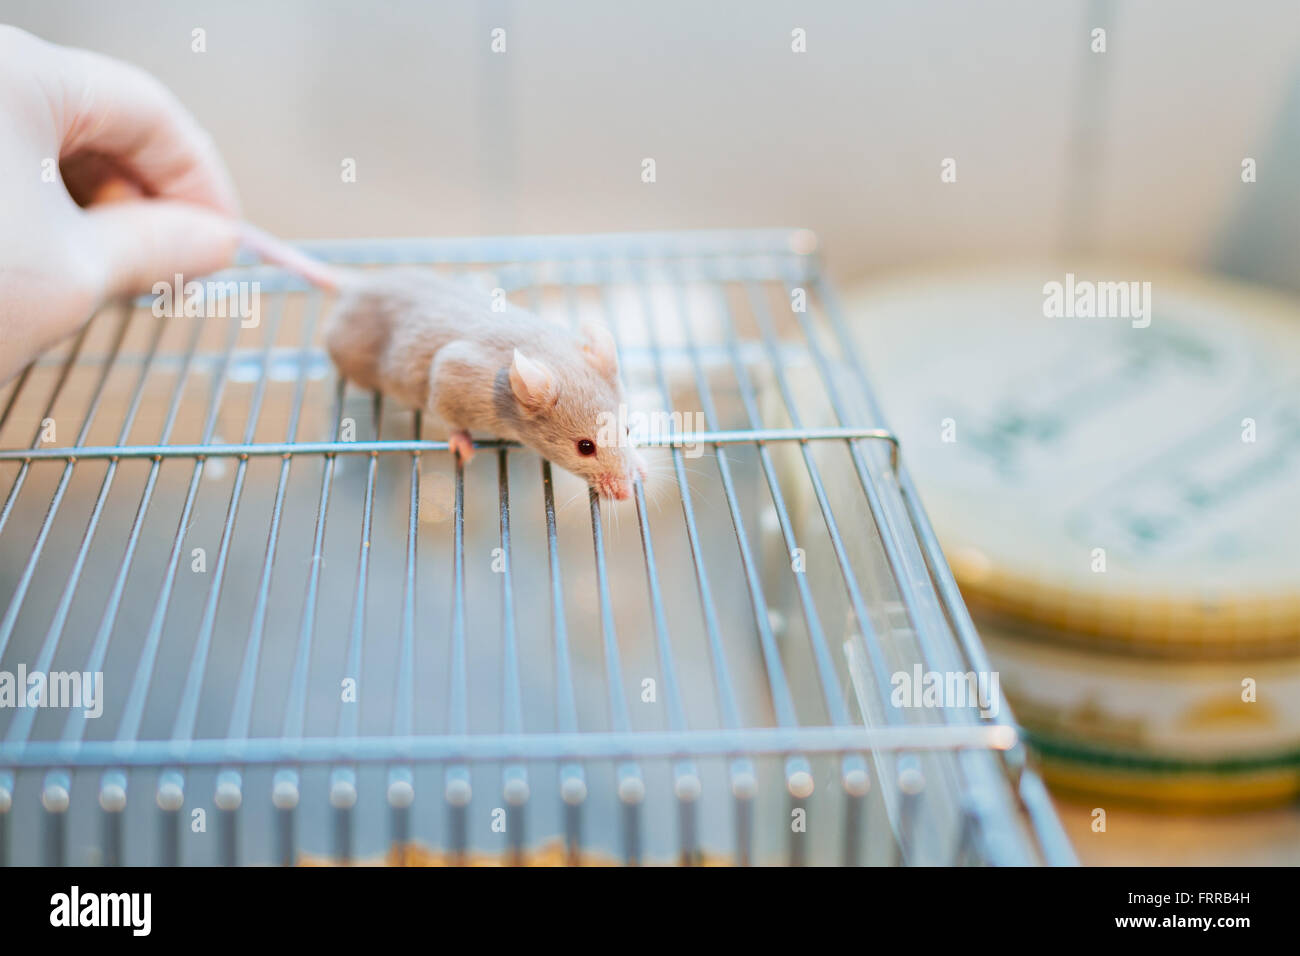 https://c8.alamy.com/comp/FRRB4H/researcher-holding-a-lab-mouse-by-its-tail-on-the-home-cage-FRRB4H.jpg